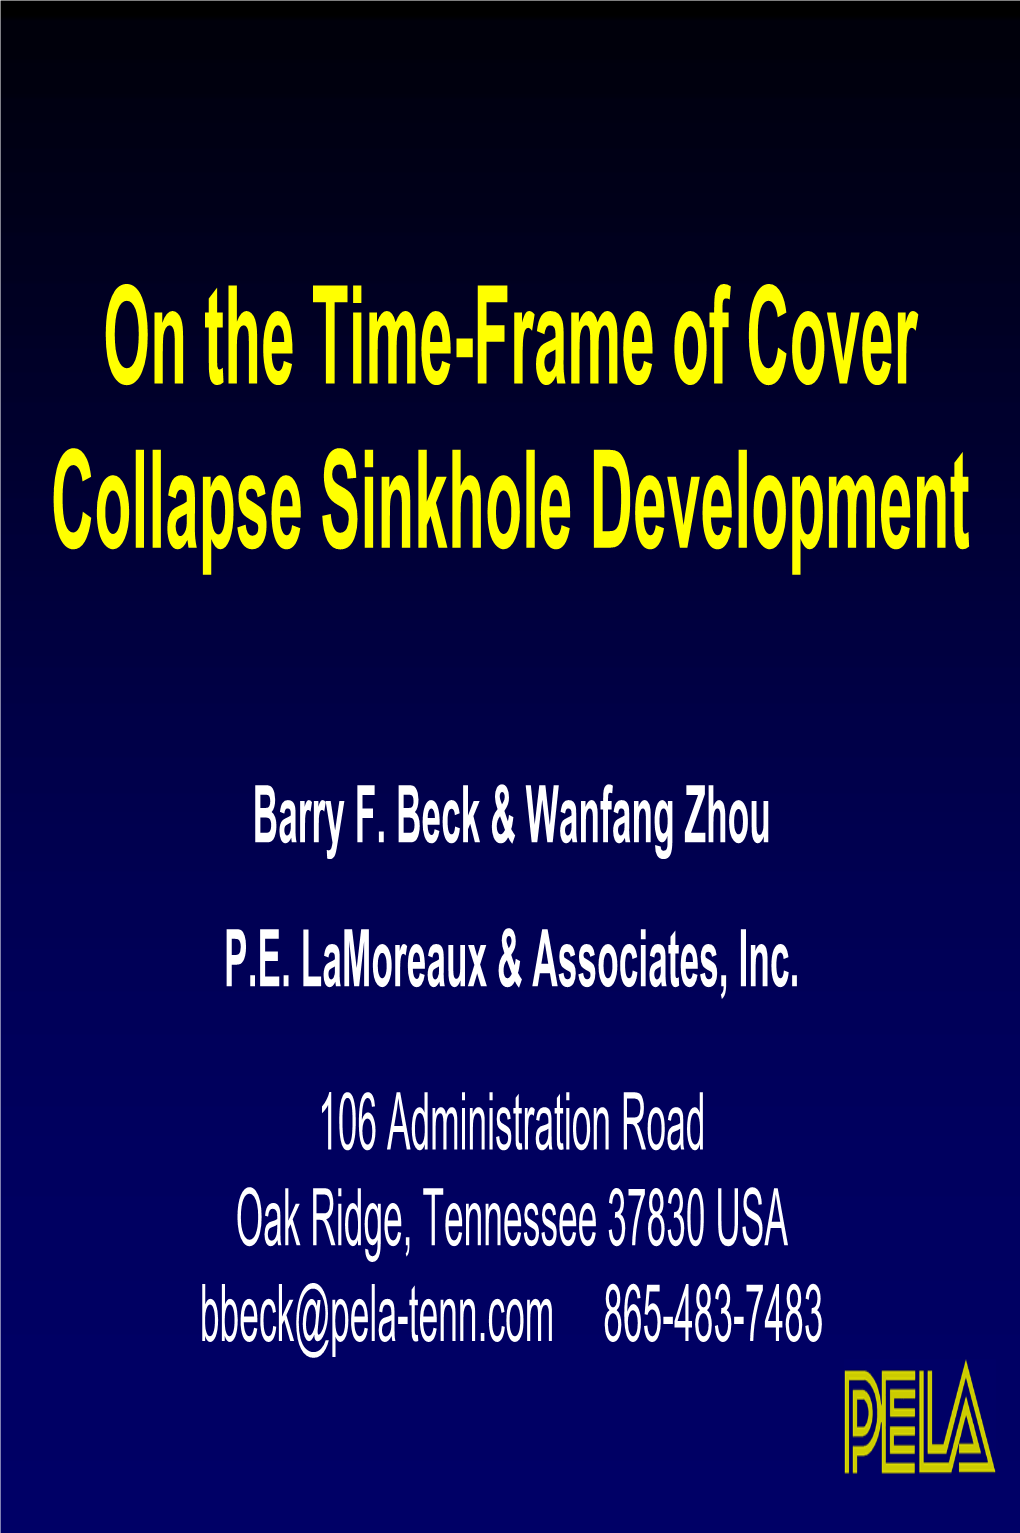 On the Time-Frame of Cover Collapse Sinkhole Development